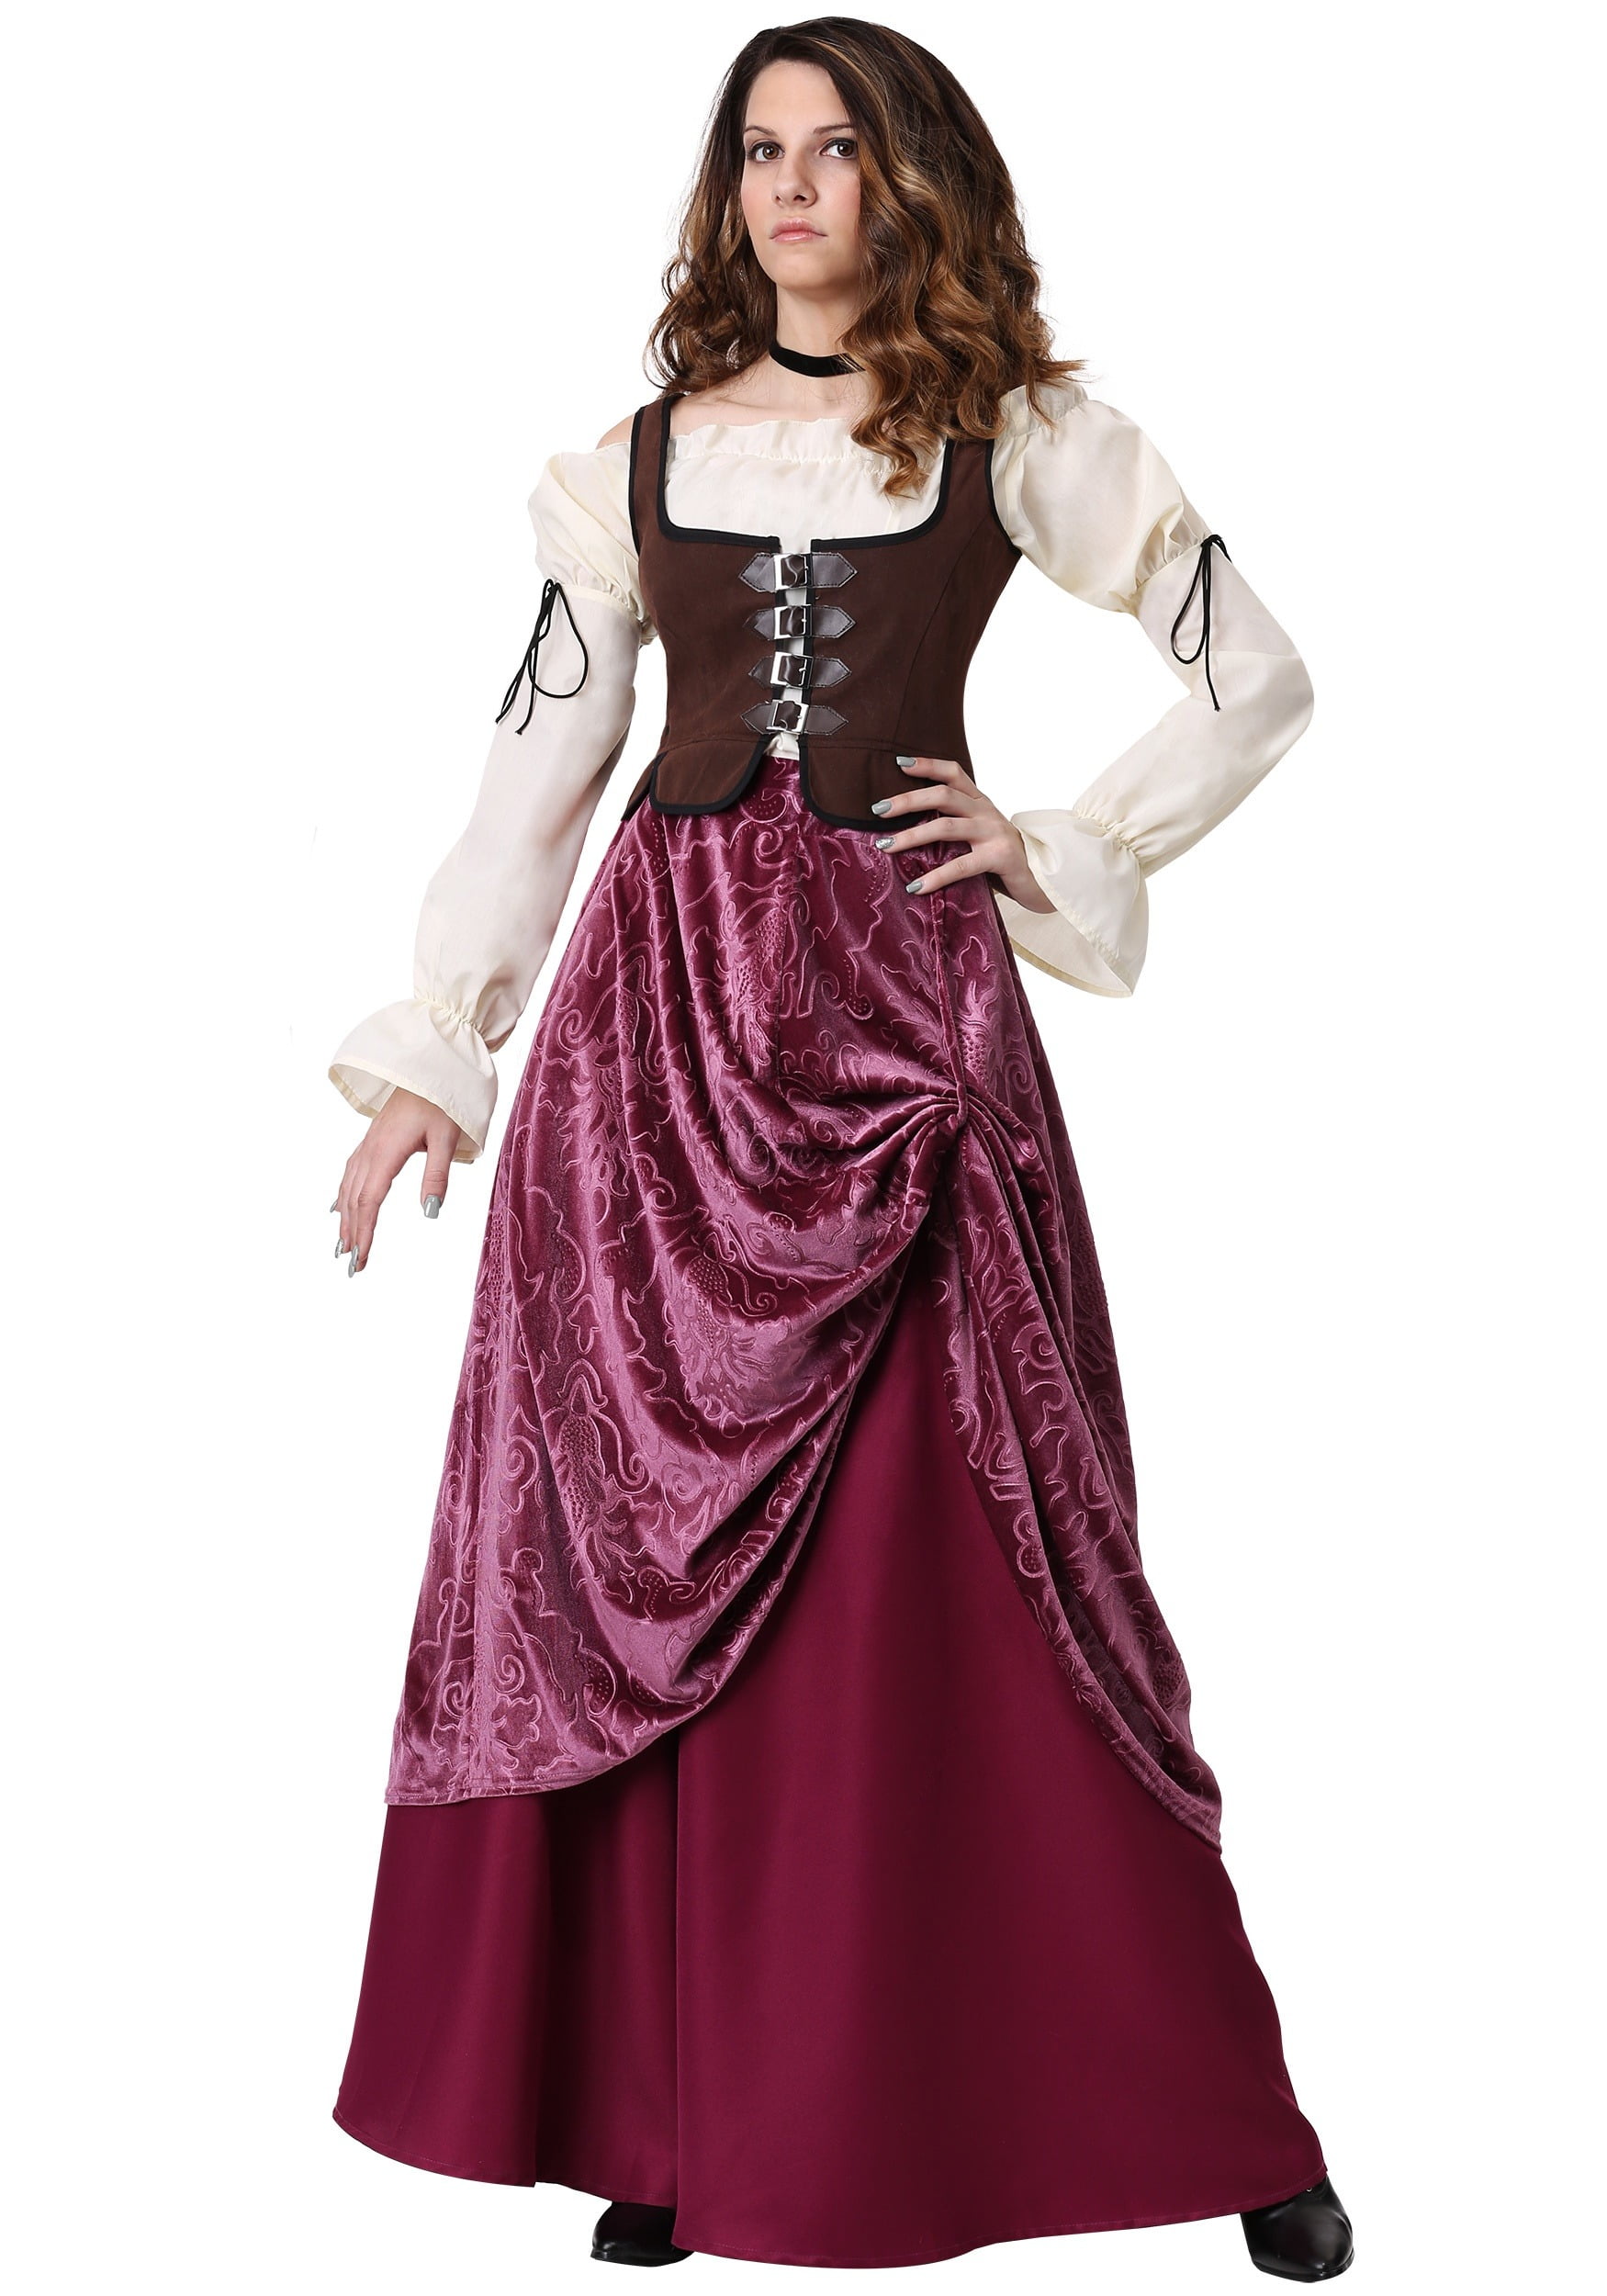 This is a Women's Tavern Wench Costume.